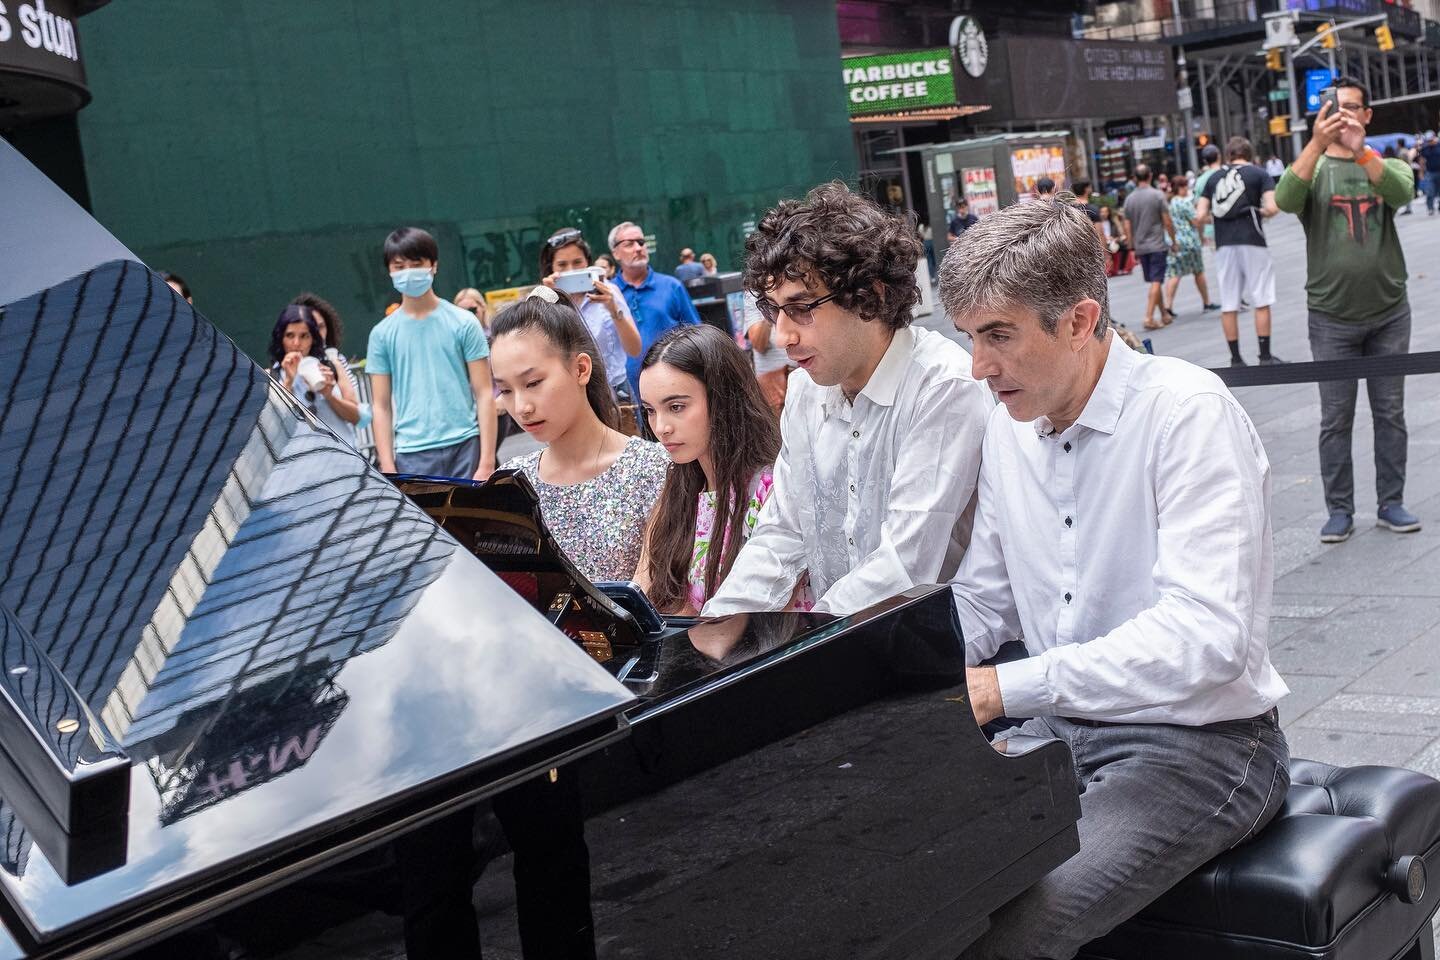 Had a wonderful time performing in Times Square for #MakeMusicDay! 🗽🎶 Definitely had a blast playing an 8 hands piece with @maximlando, @harmonypianist, and @pianoblair! ❤️ (Scroll to the end for a sneak peak! More videos coming soon...)
&bull;
Tha